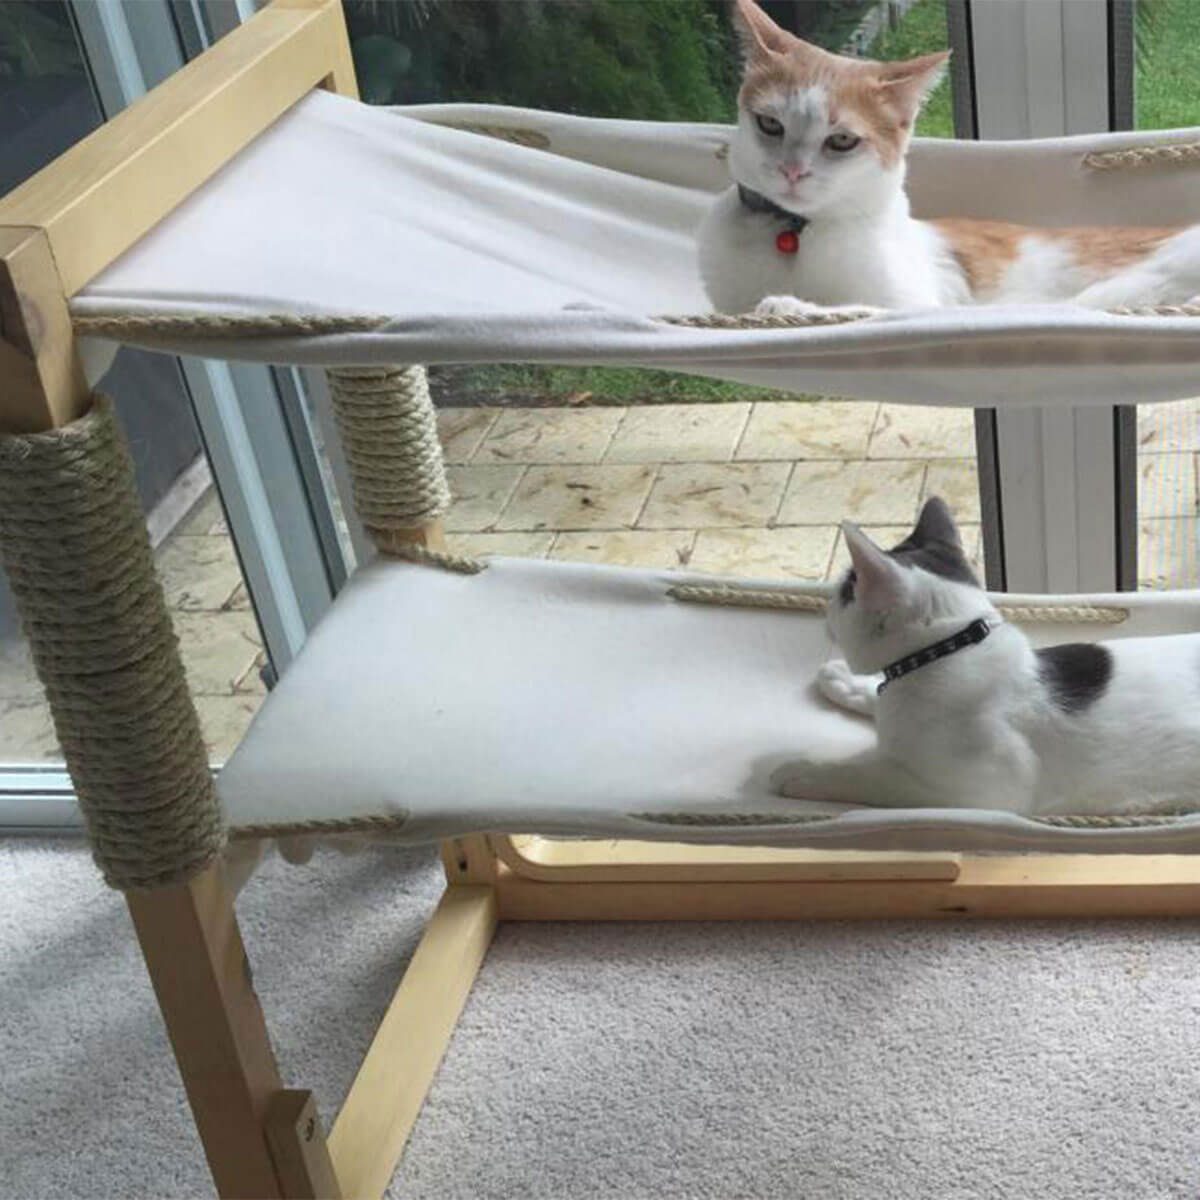 Furniture Designed for Pets and Humans Lets Both Live in Utmost Synergy